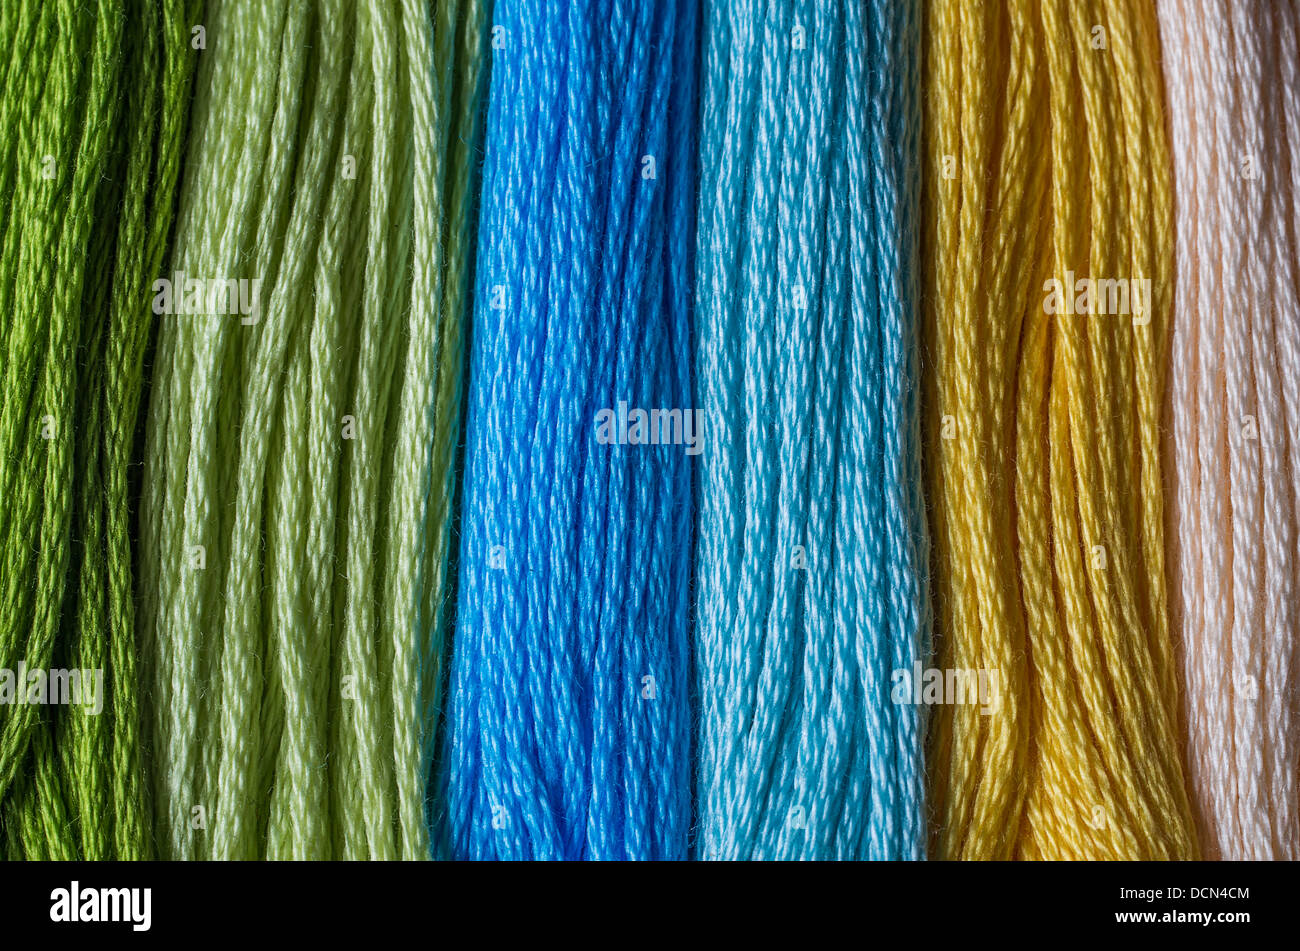 floss-thread-for-embroidery-stock-photo-alamy